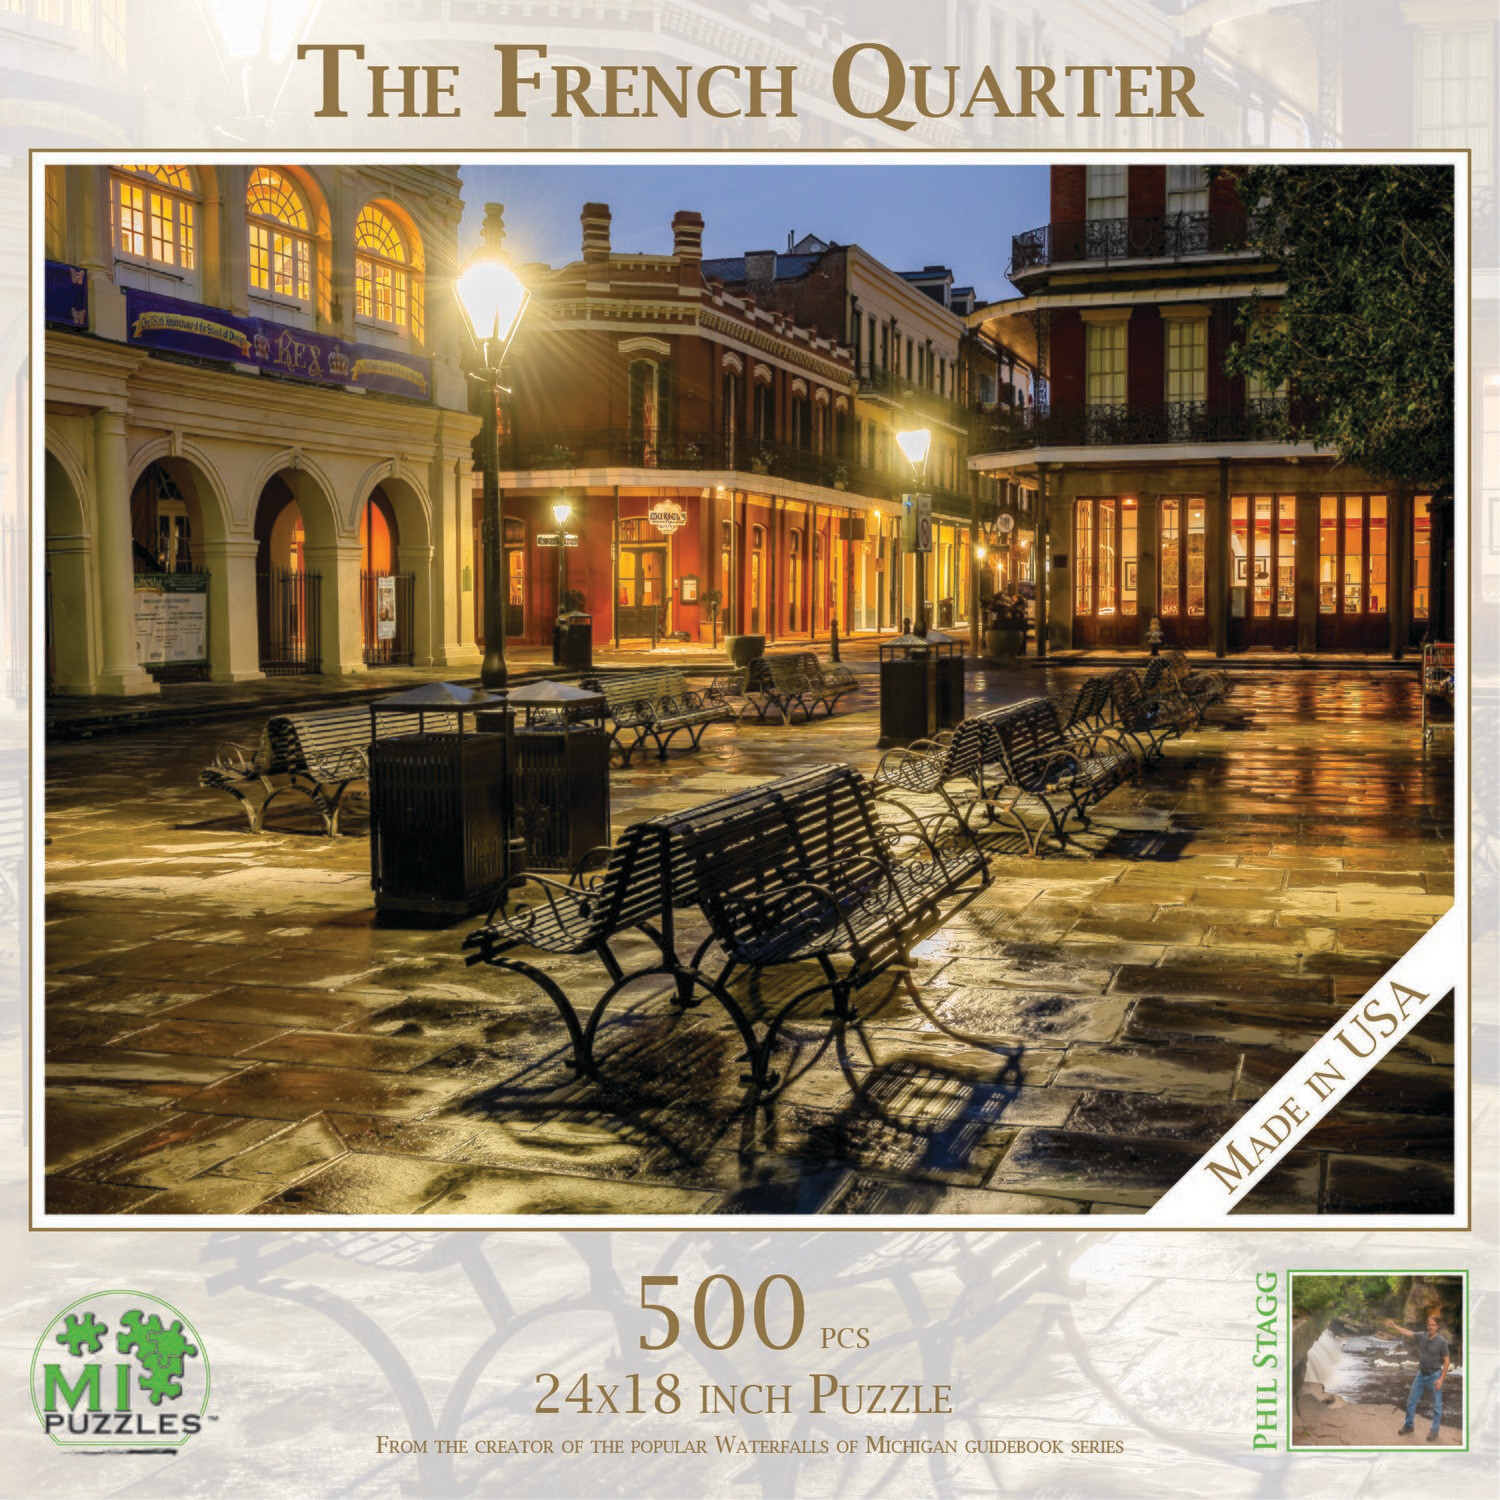 THE FRENCH QUARTER